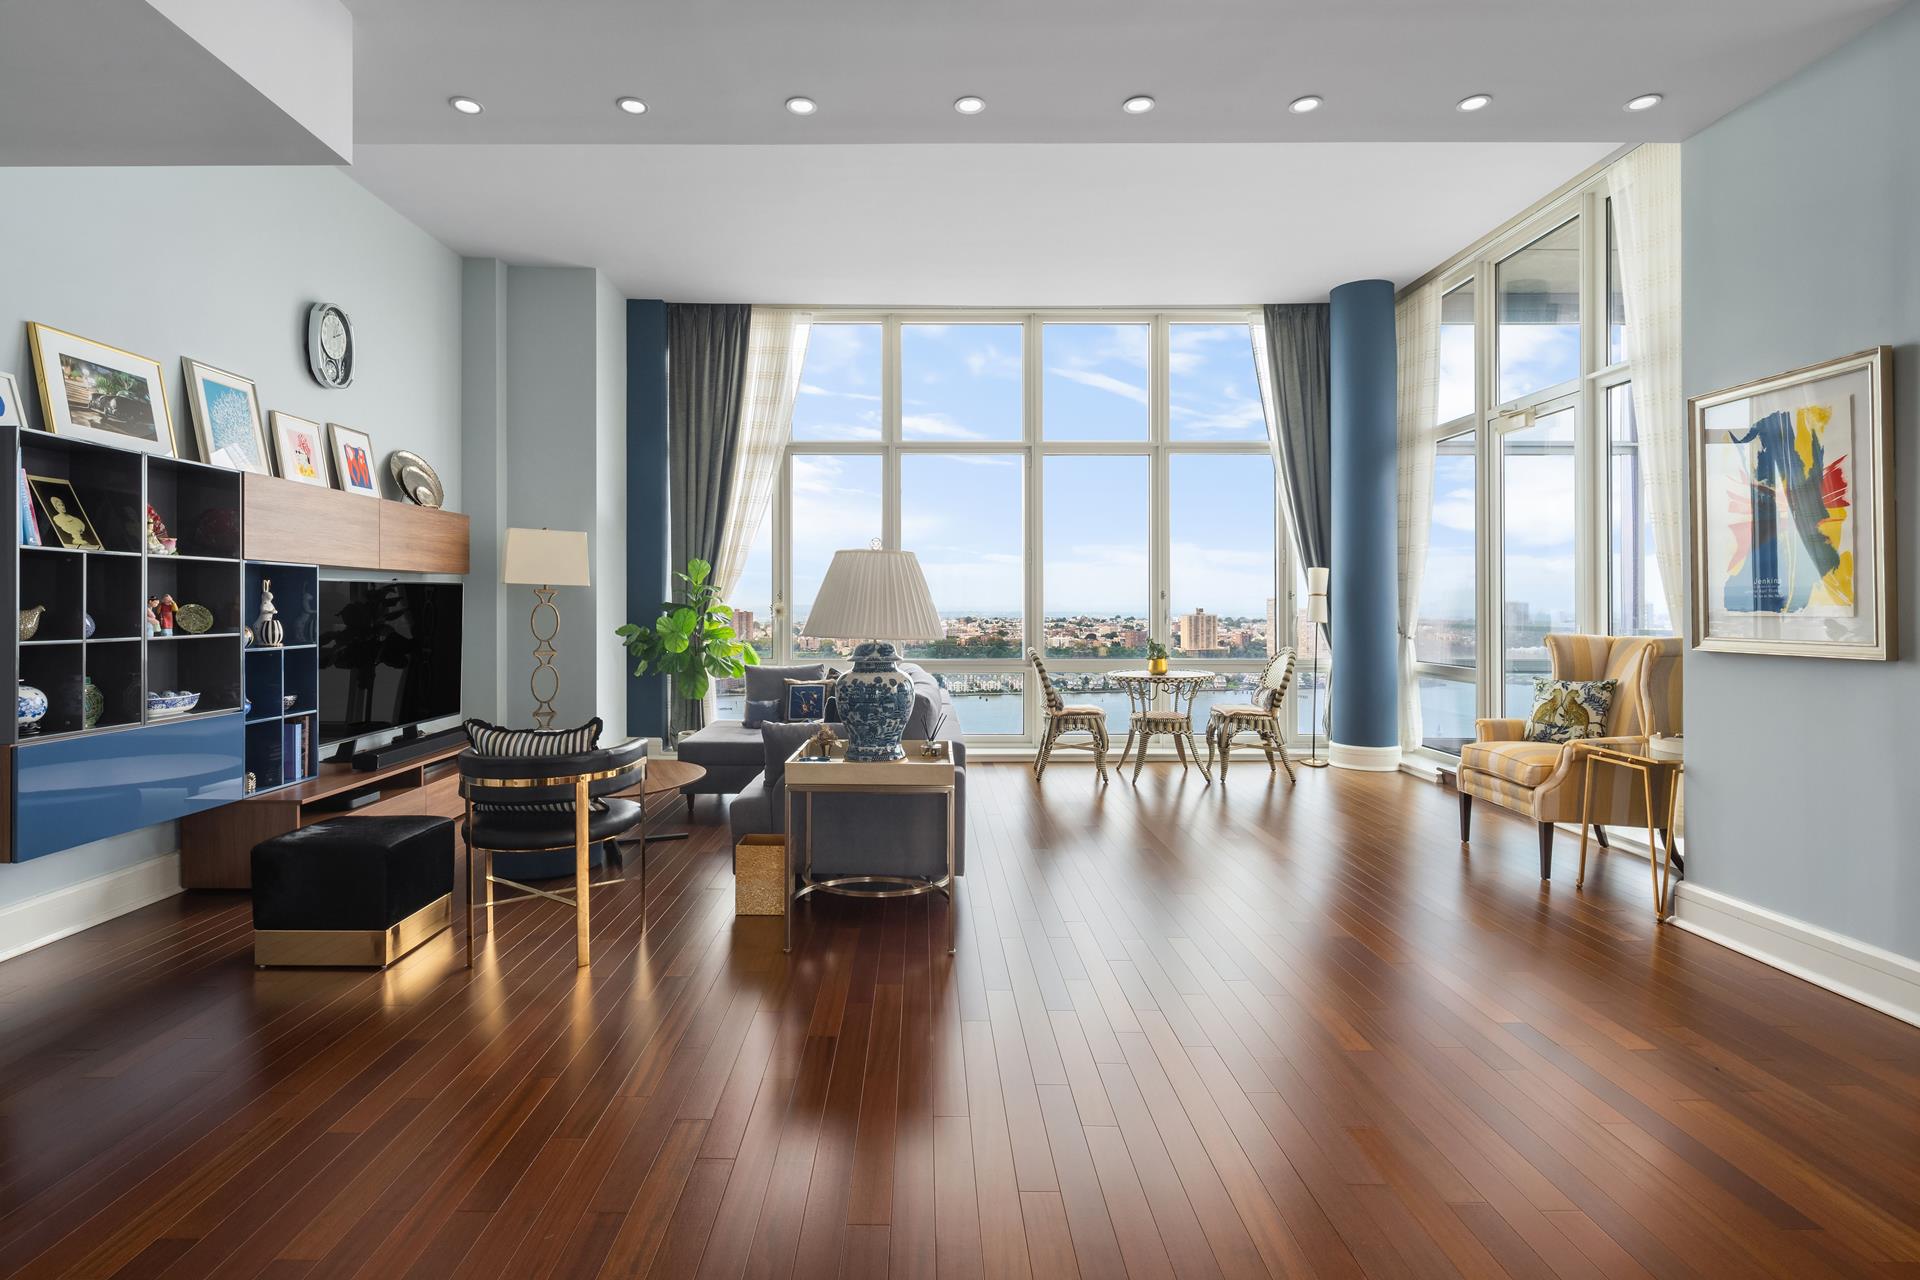 60 Riverside Boulevard Ph40014002, Lincoln Sq, Upper West Side, NYC - 8 Bedrooms  
8.5 Bathrooms  
20 Rooms - 